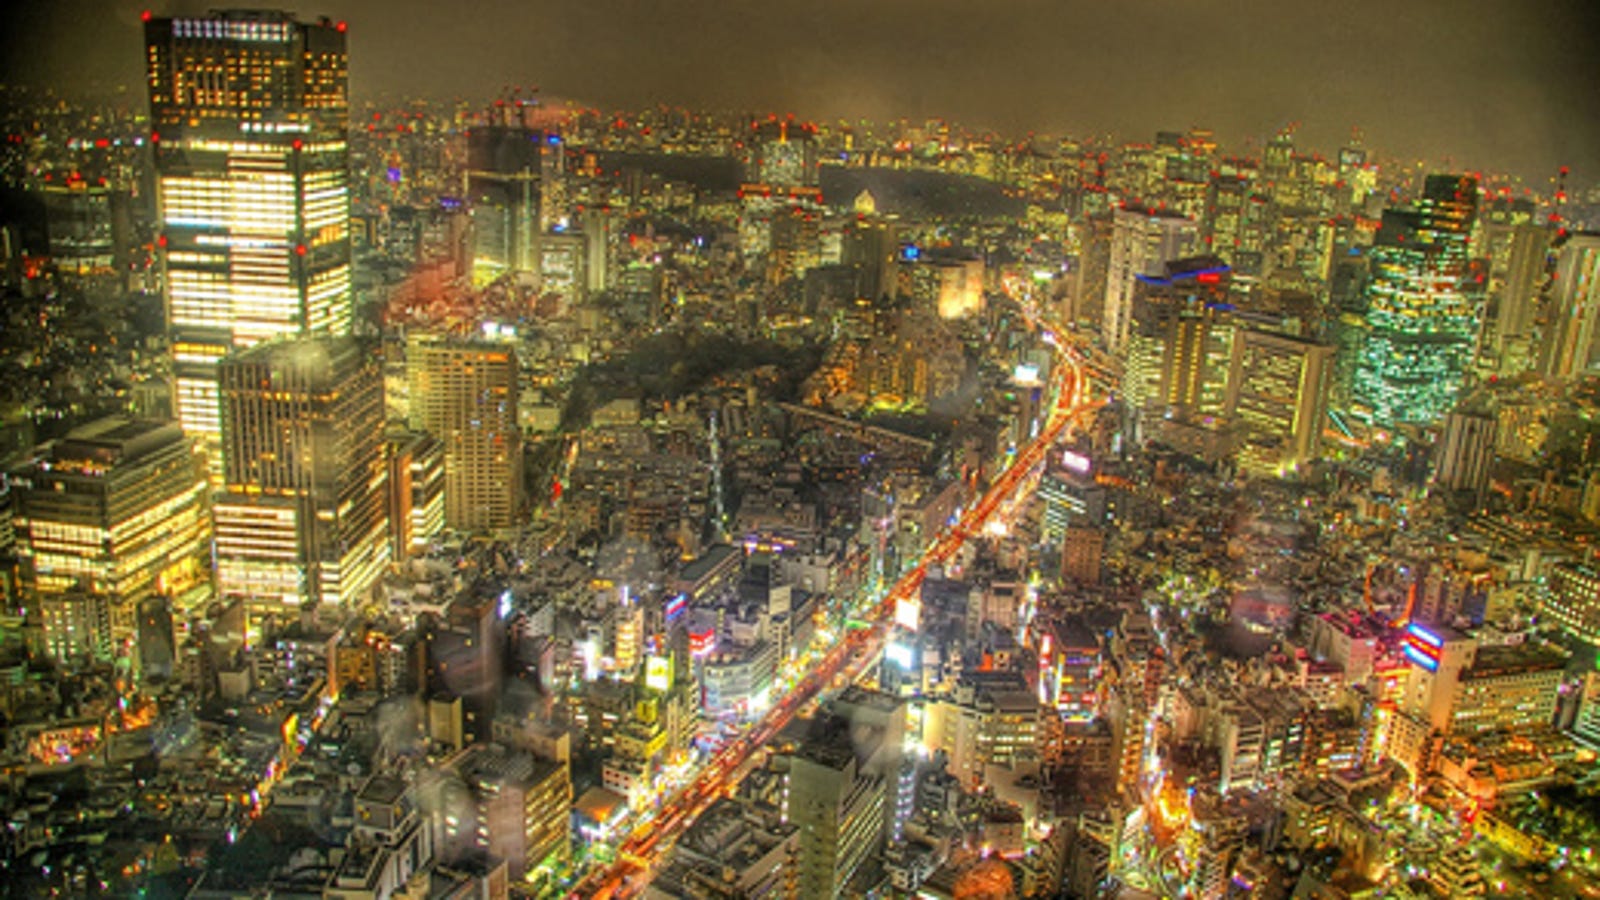 Tokyo Night Photo in High Dynamic Range: Please Build HDR into Cams!